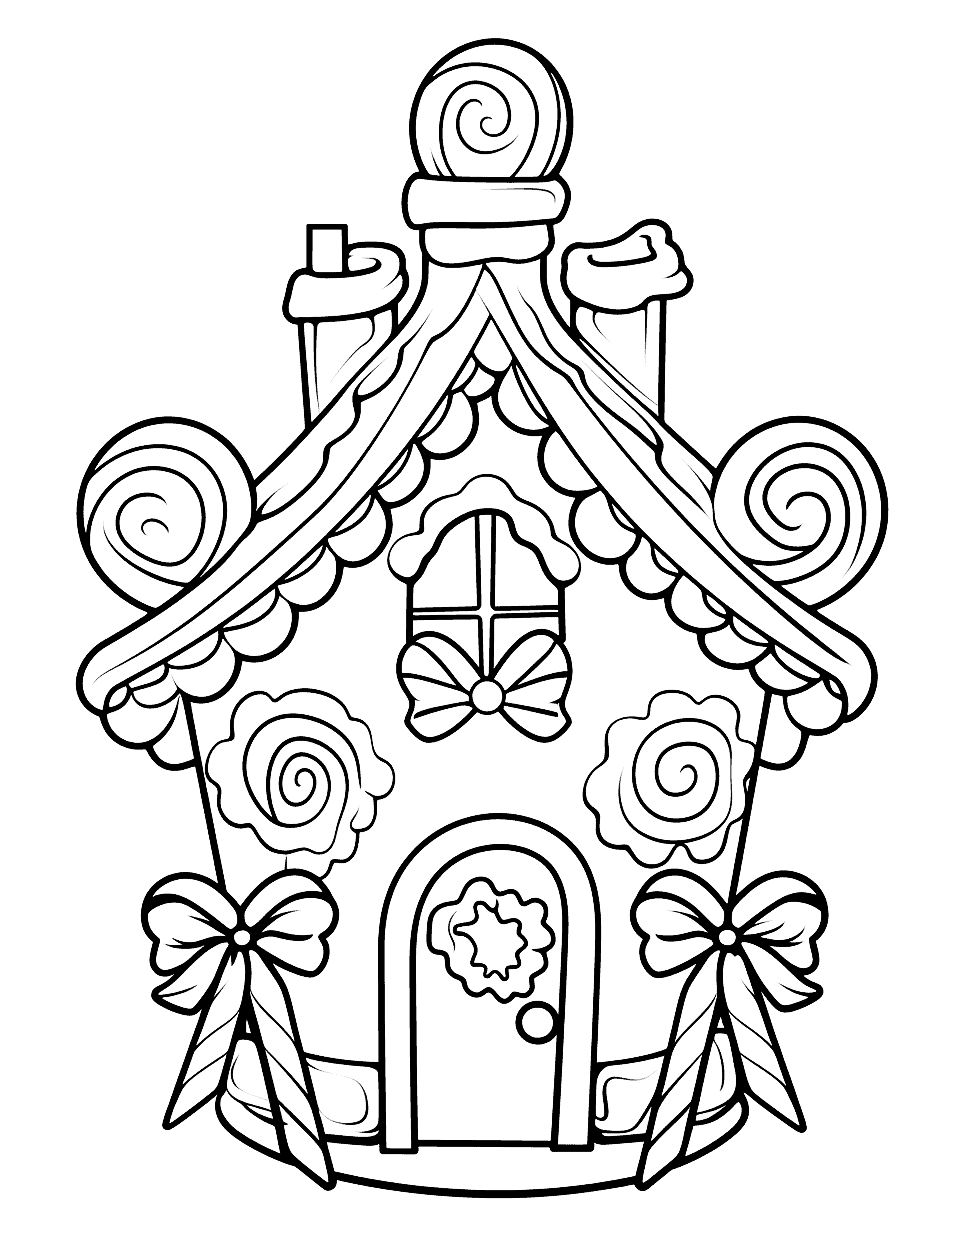 Gingerbread House Decorations Christmas Coloring Page - Decorating a gingerbread house with icing and candy.